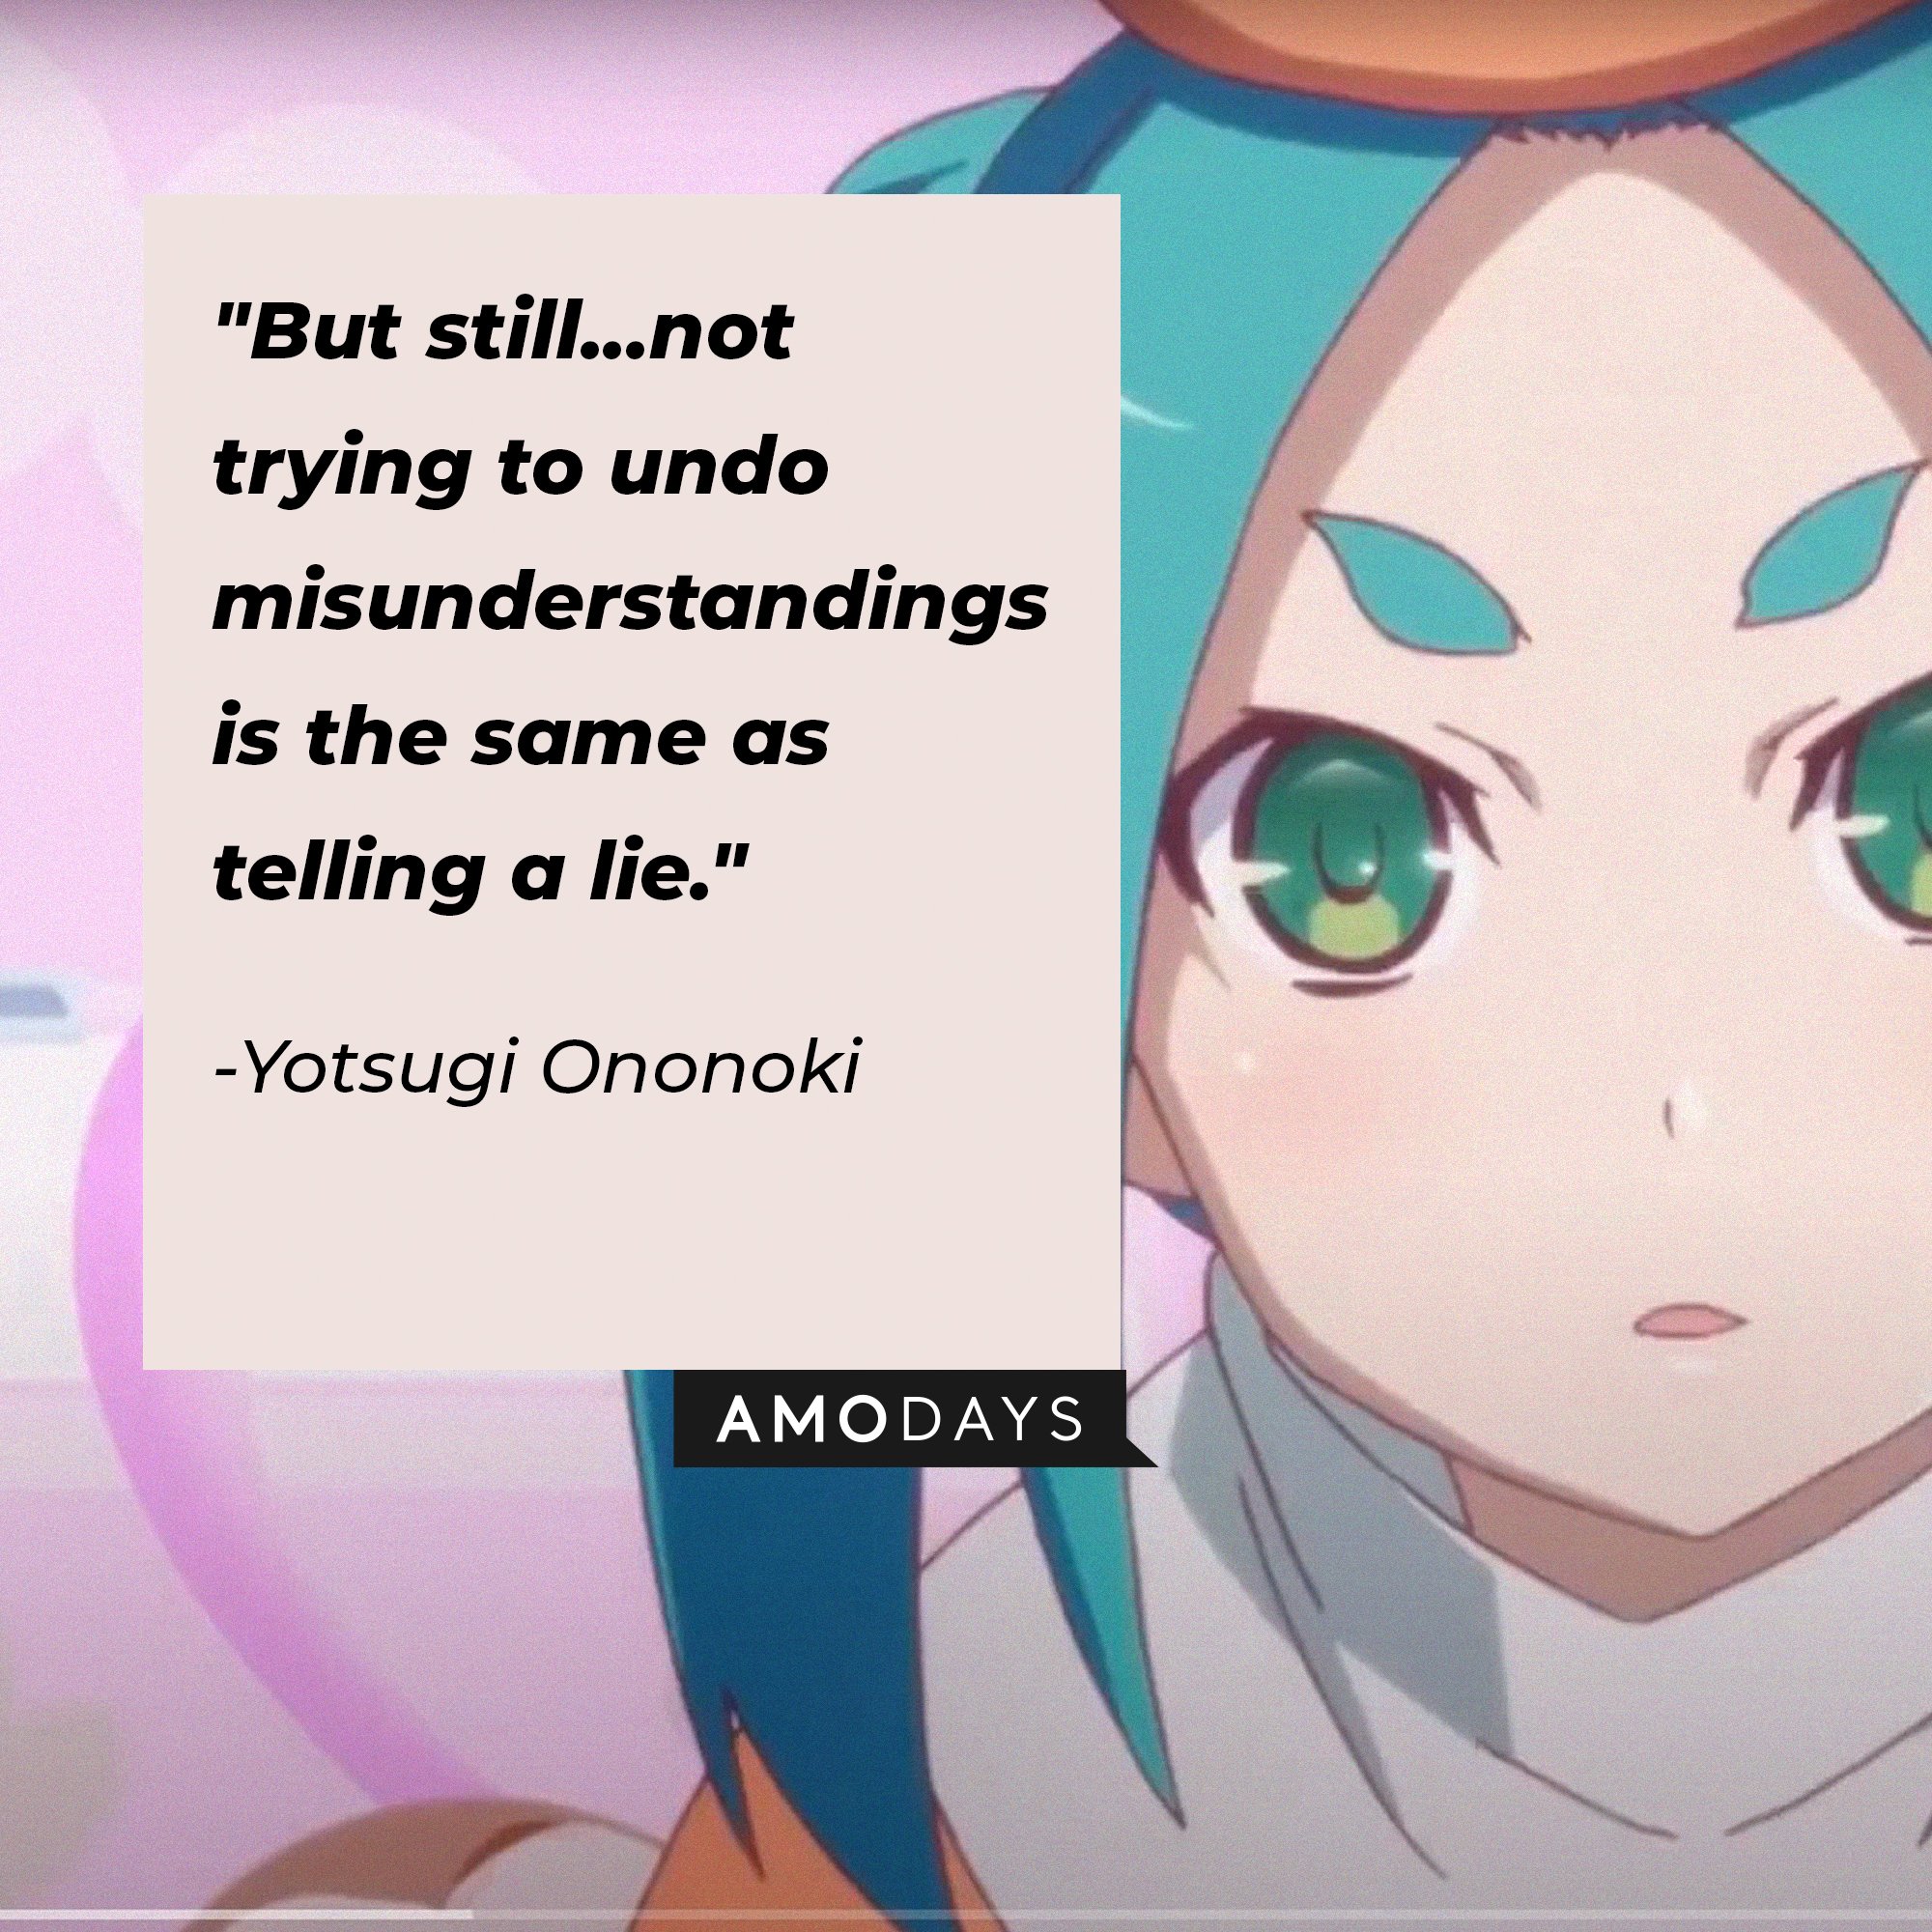 Yotsugi Ononoki’s quote: "But still...not trying to undo misunderstandings is the same as telling a lie." | Image: AmoDays 